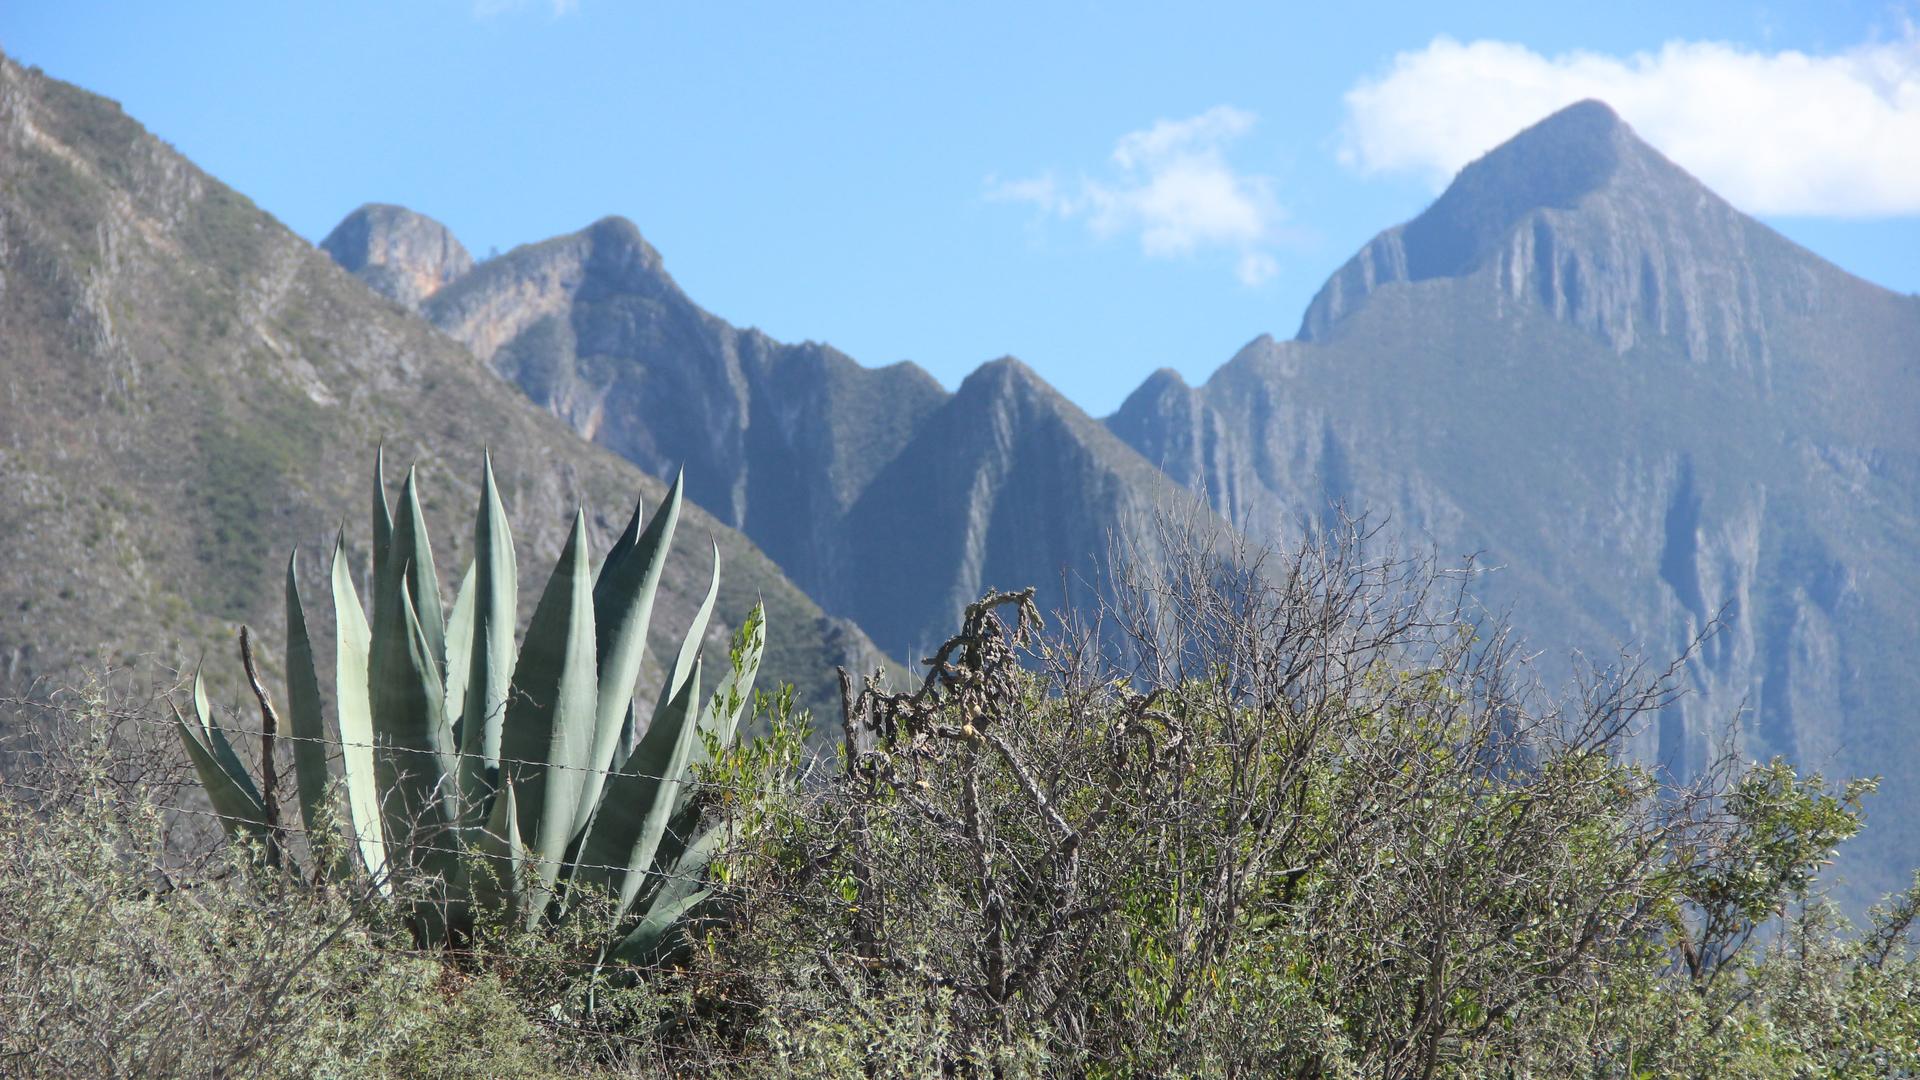 The Nature Conservancy hopes to plant perhaps 100,000 native agave and pine trees in the forests around Monterrey, Mexico’s third-largest metro area. 